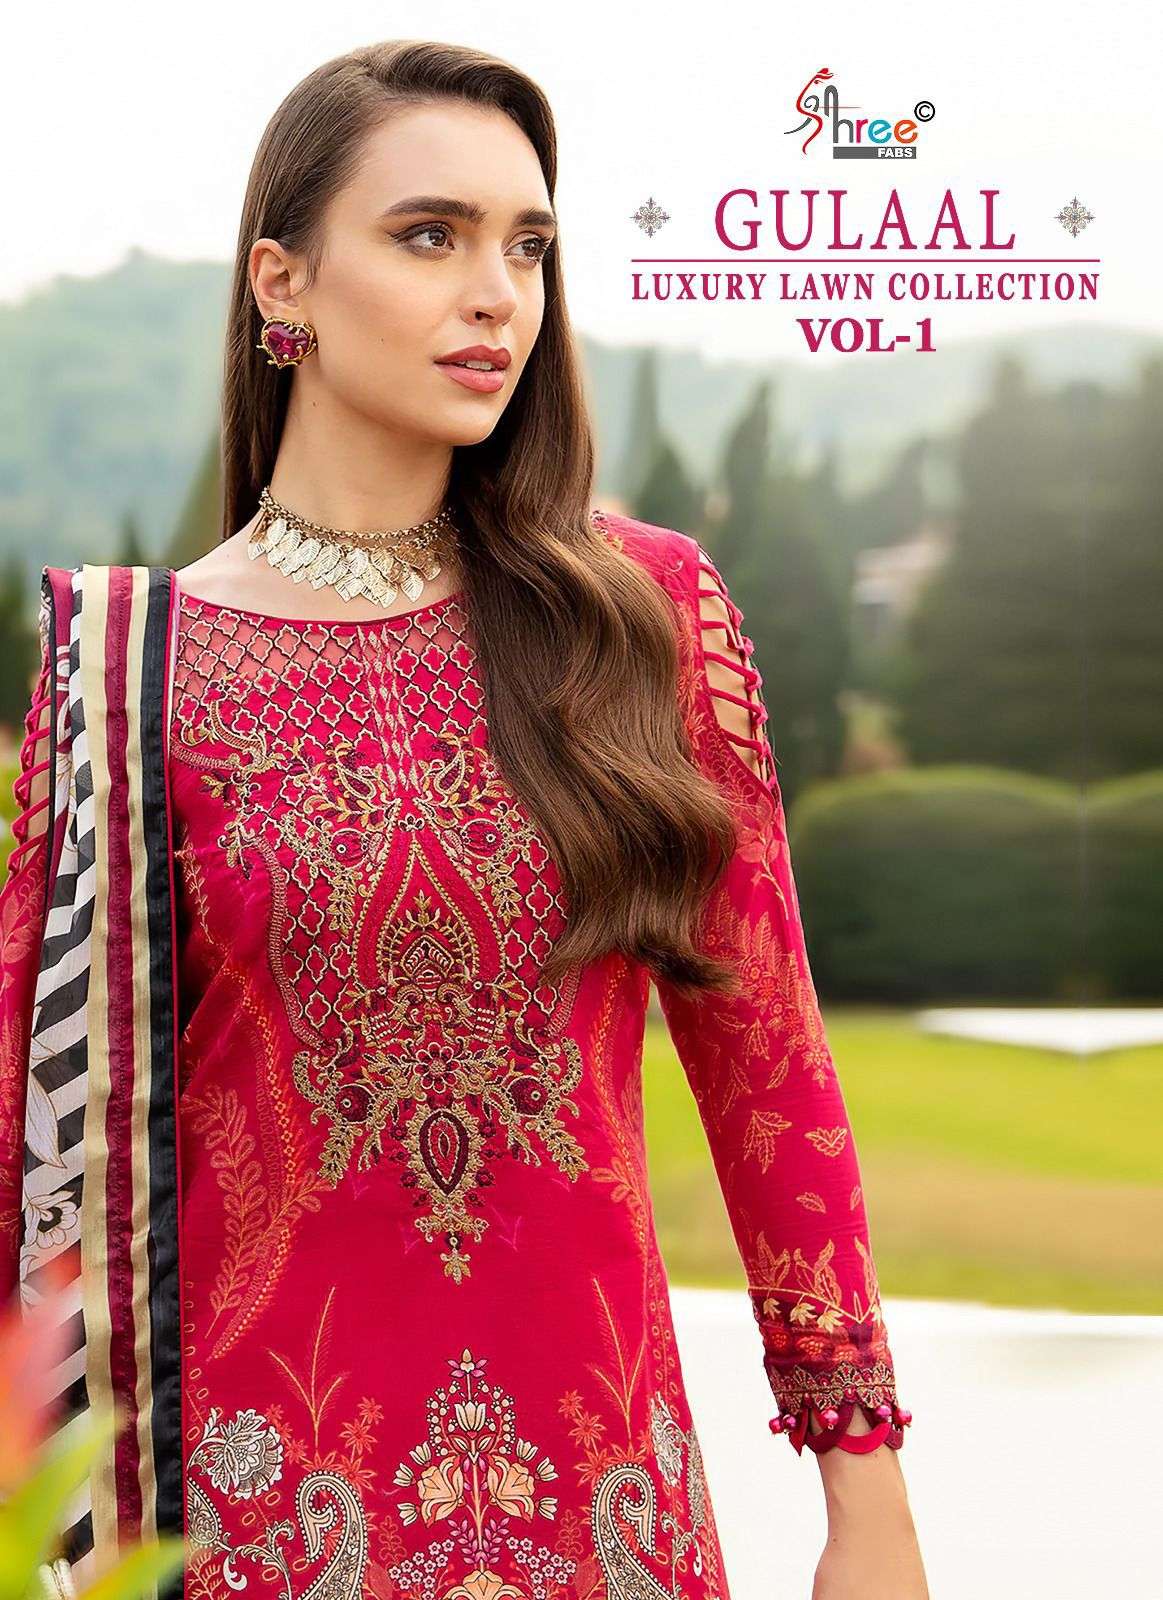 Shree Fabs Gulaal Luxury Lawn Collection Vol 1 Latest Pakistani Cotton Suit Dealers